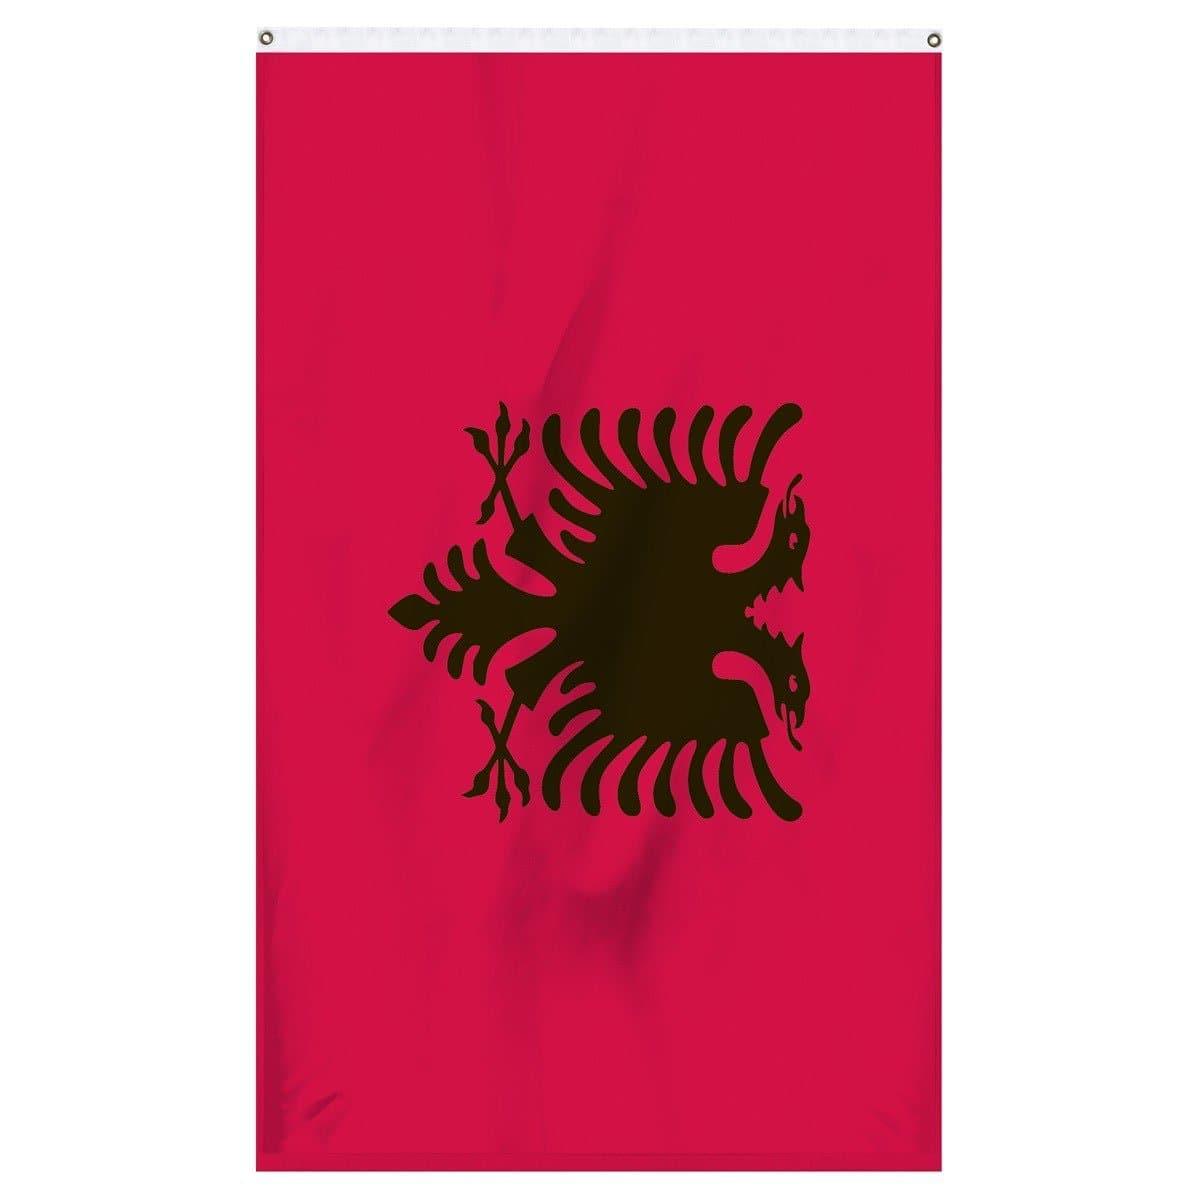 Albania international flag for sale to fly on a flagpole